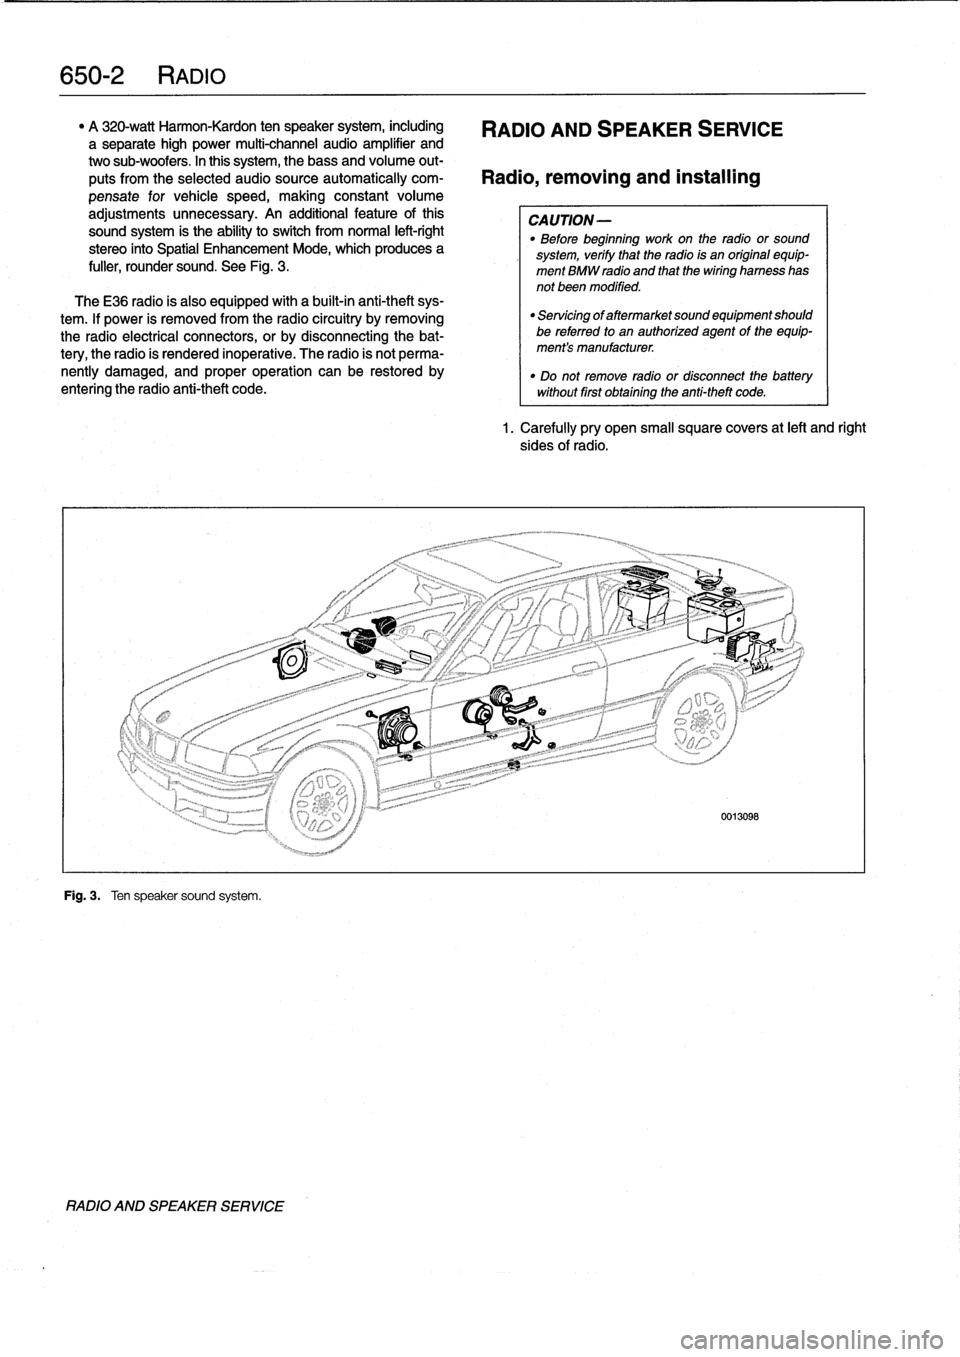 BMW M3 1996 E36 User Guide 
650-2
RADIO

"
A
320-watt
Harmon-Kardon
ten
speaker
system,
including

	

RADIO
AND
SPEAKER
SERVICE
a
separate
high
power
multi-channel
audio
amplifier
and
two
sub-woofers
.
In
this
system,
thebass
a